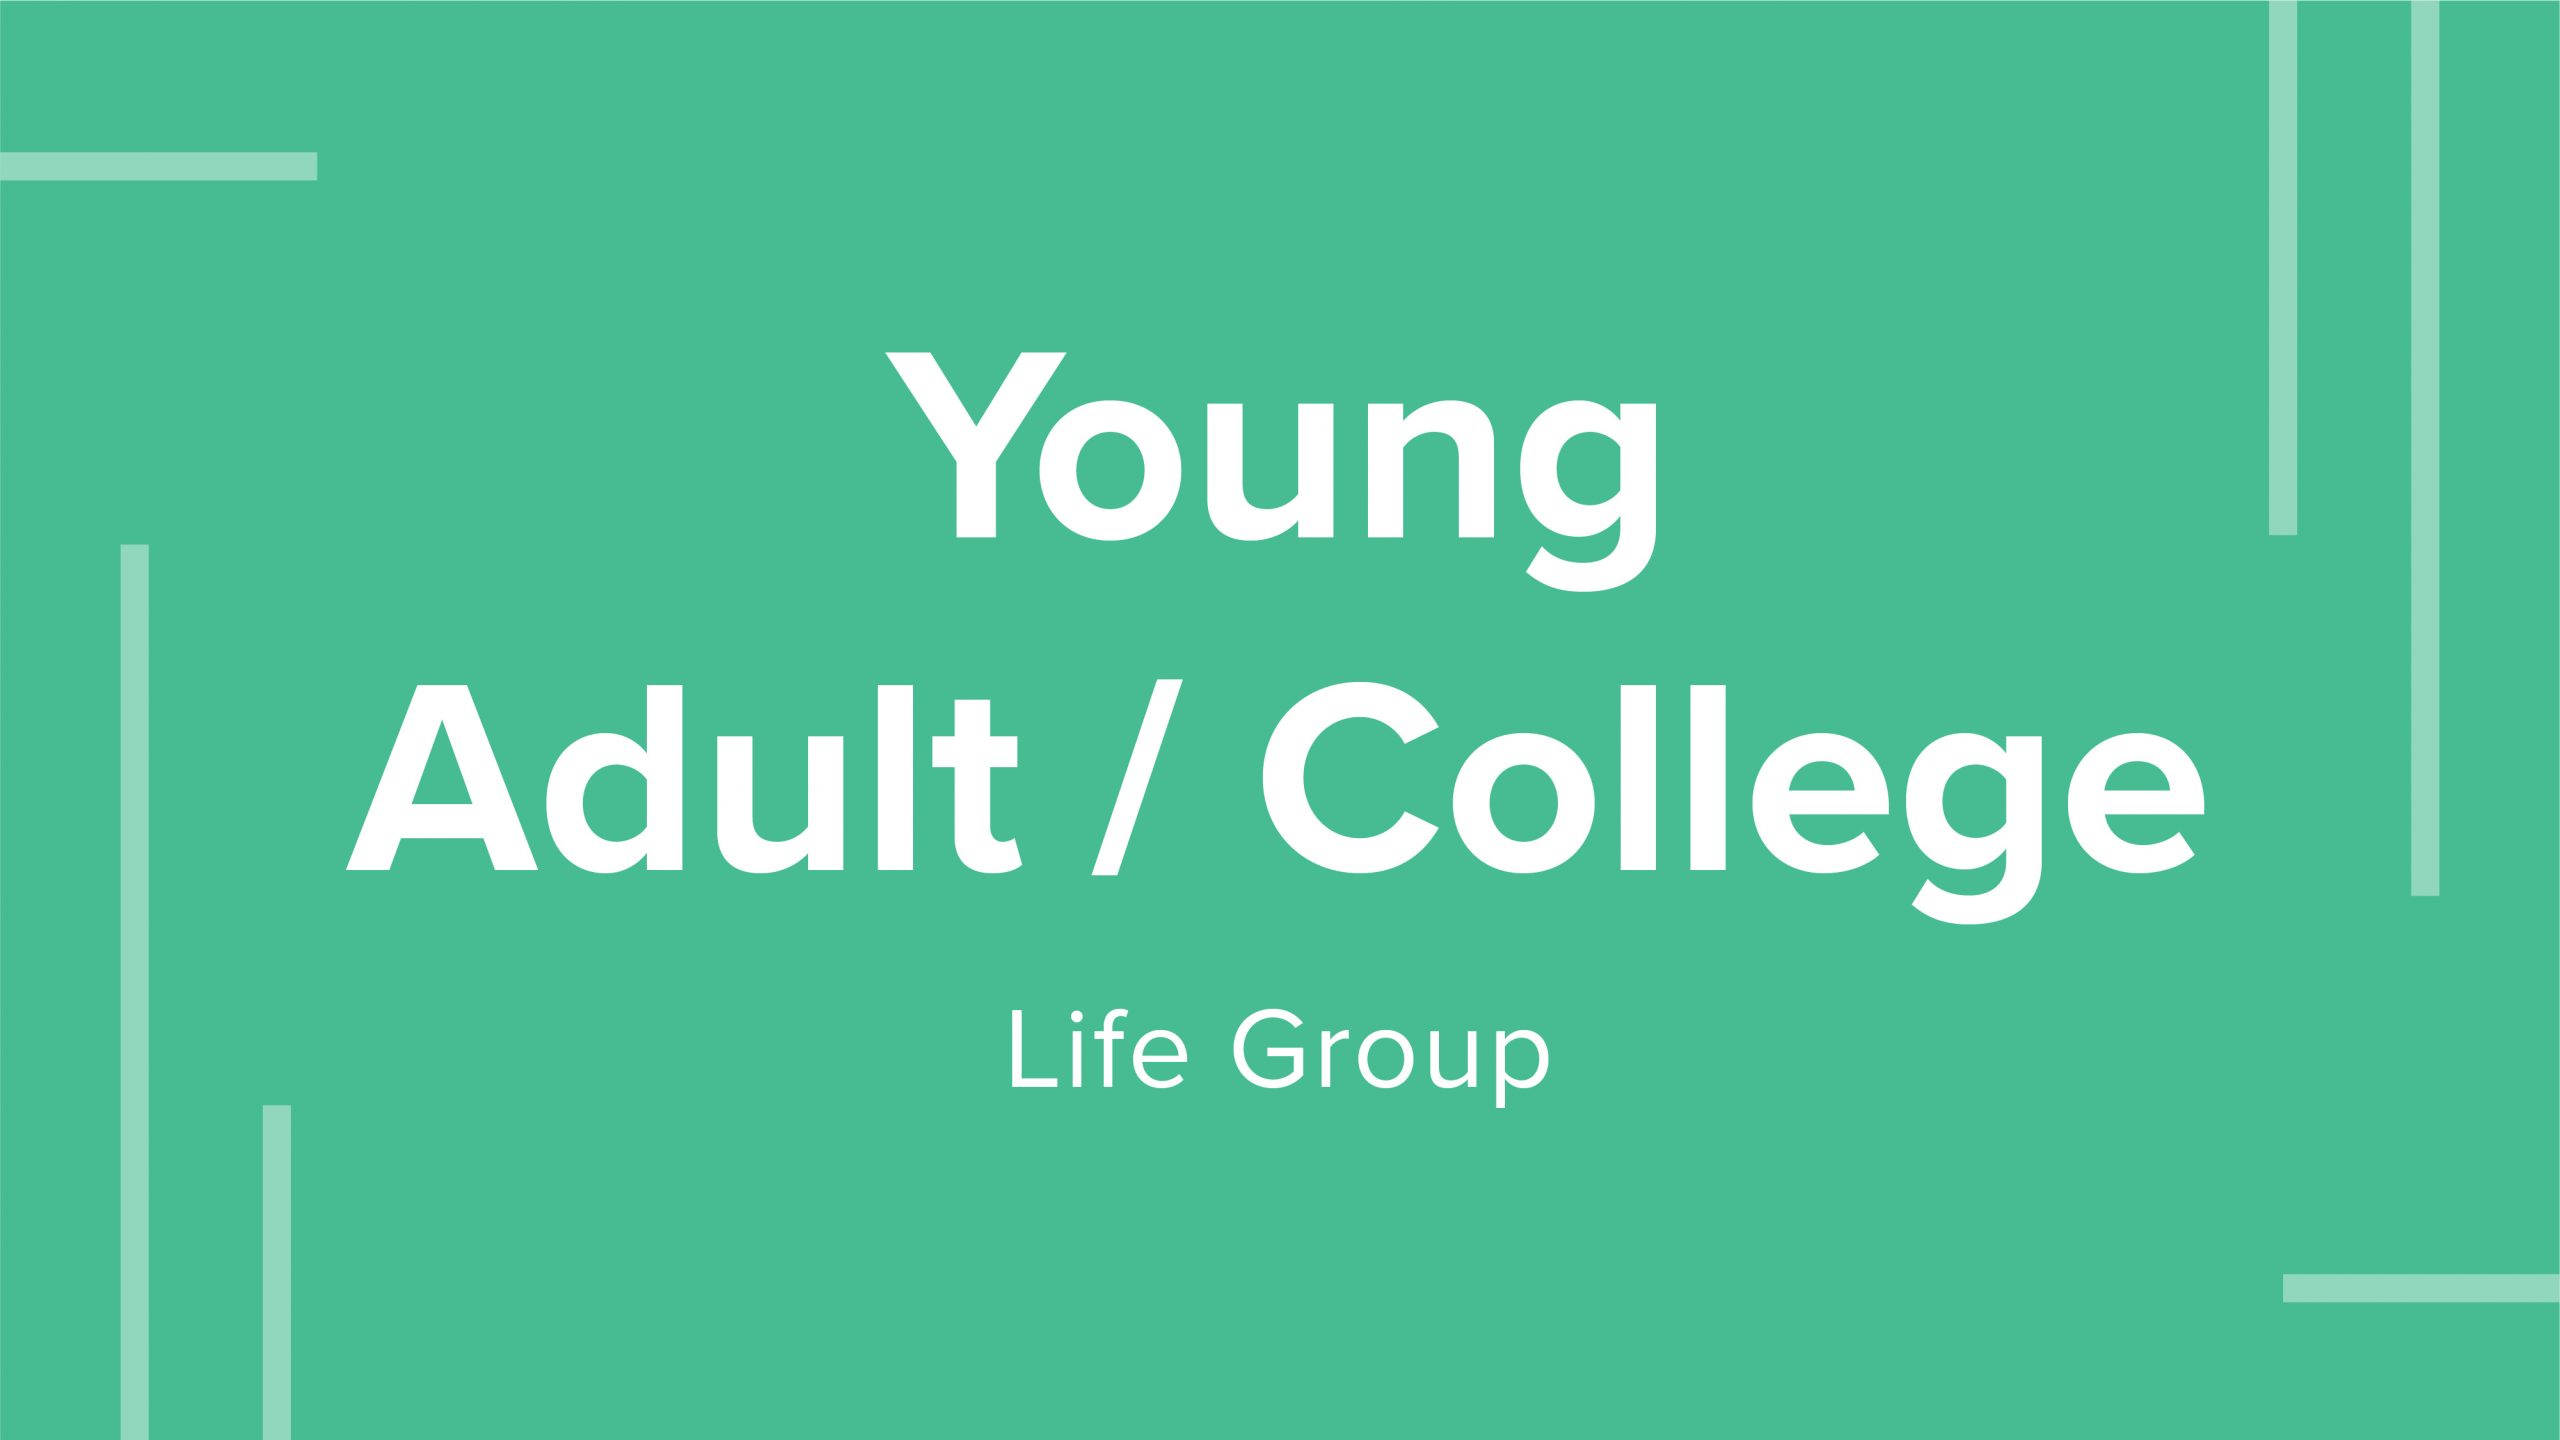 Young Adult/College Life Group